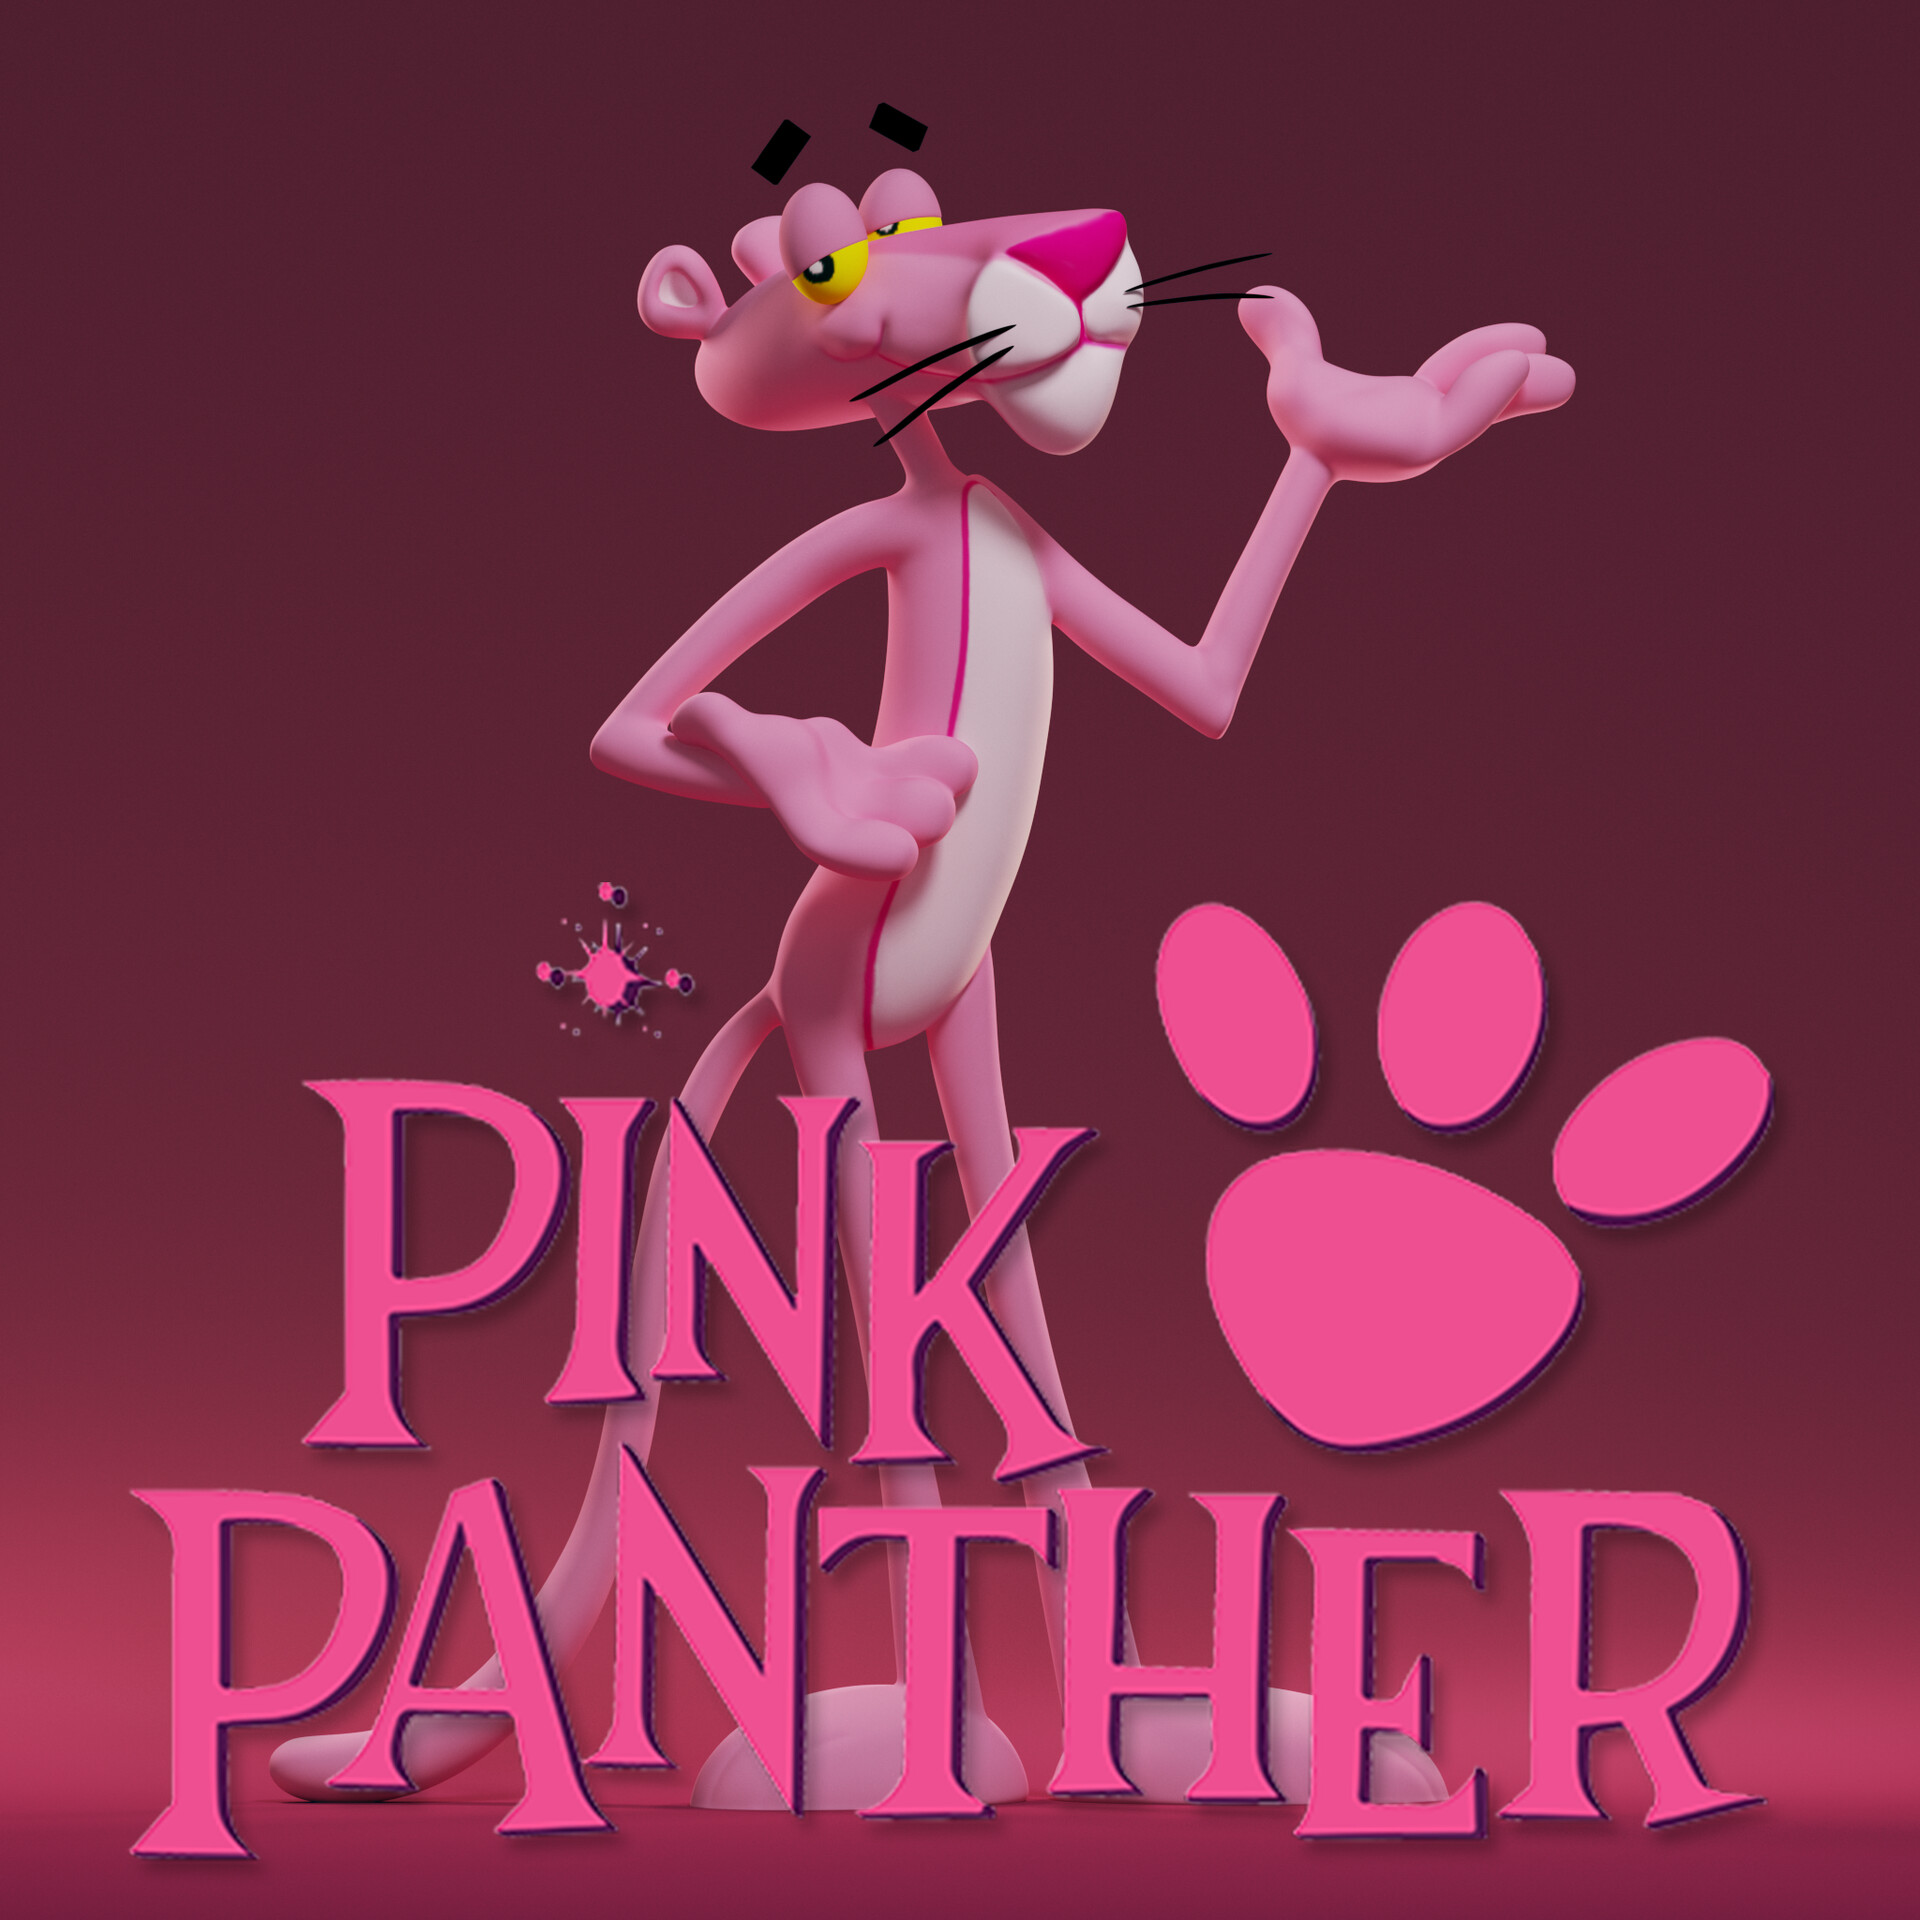 Gil Lagziel - The Pink Panther